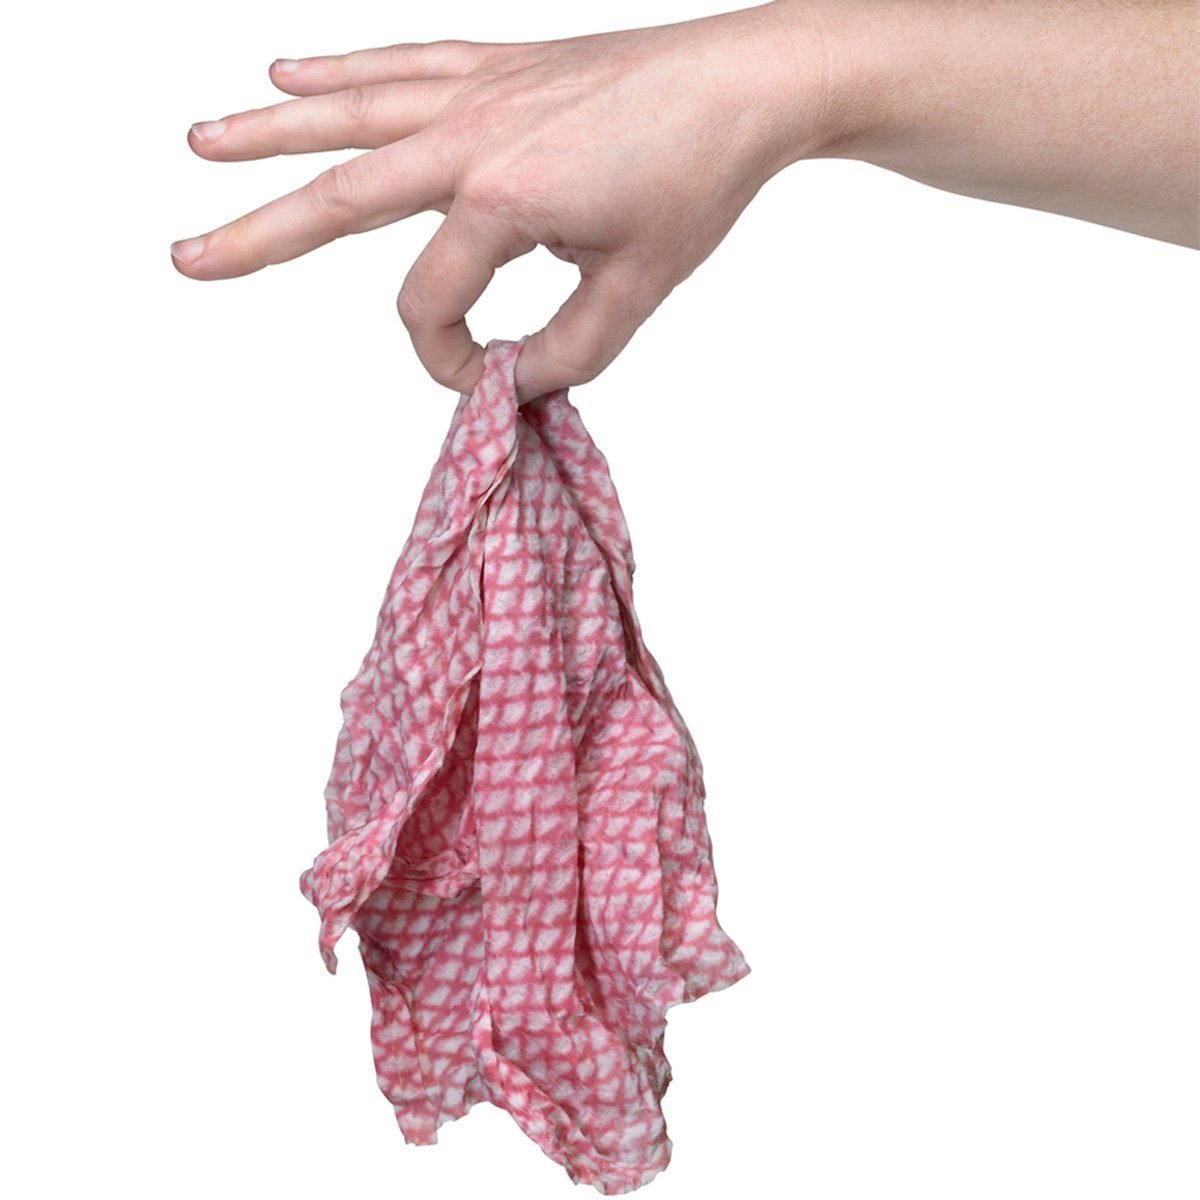 Boil your dishcloths! How to make your everyday environment